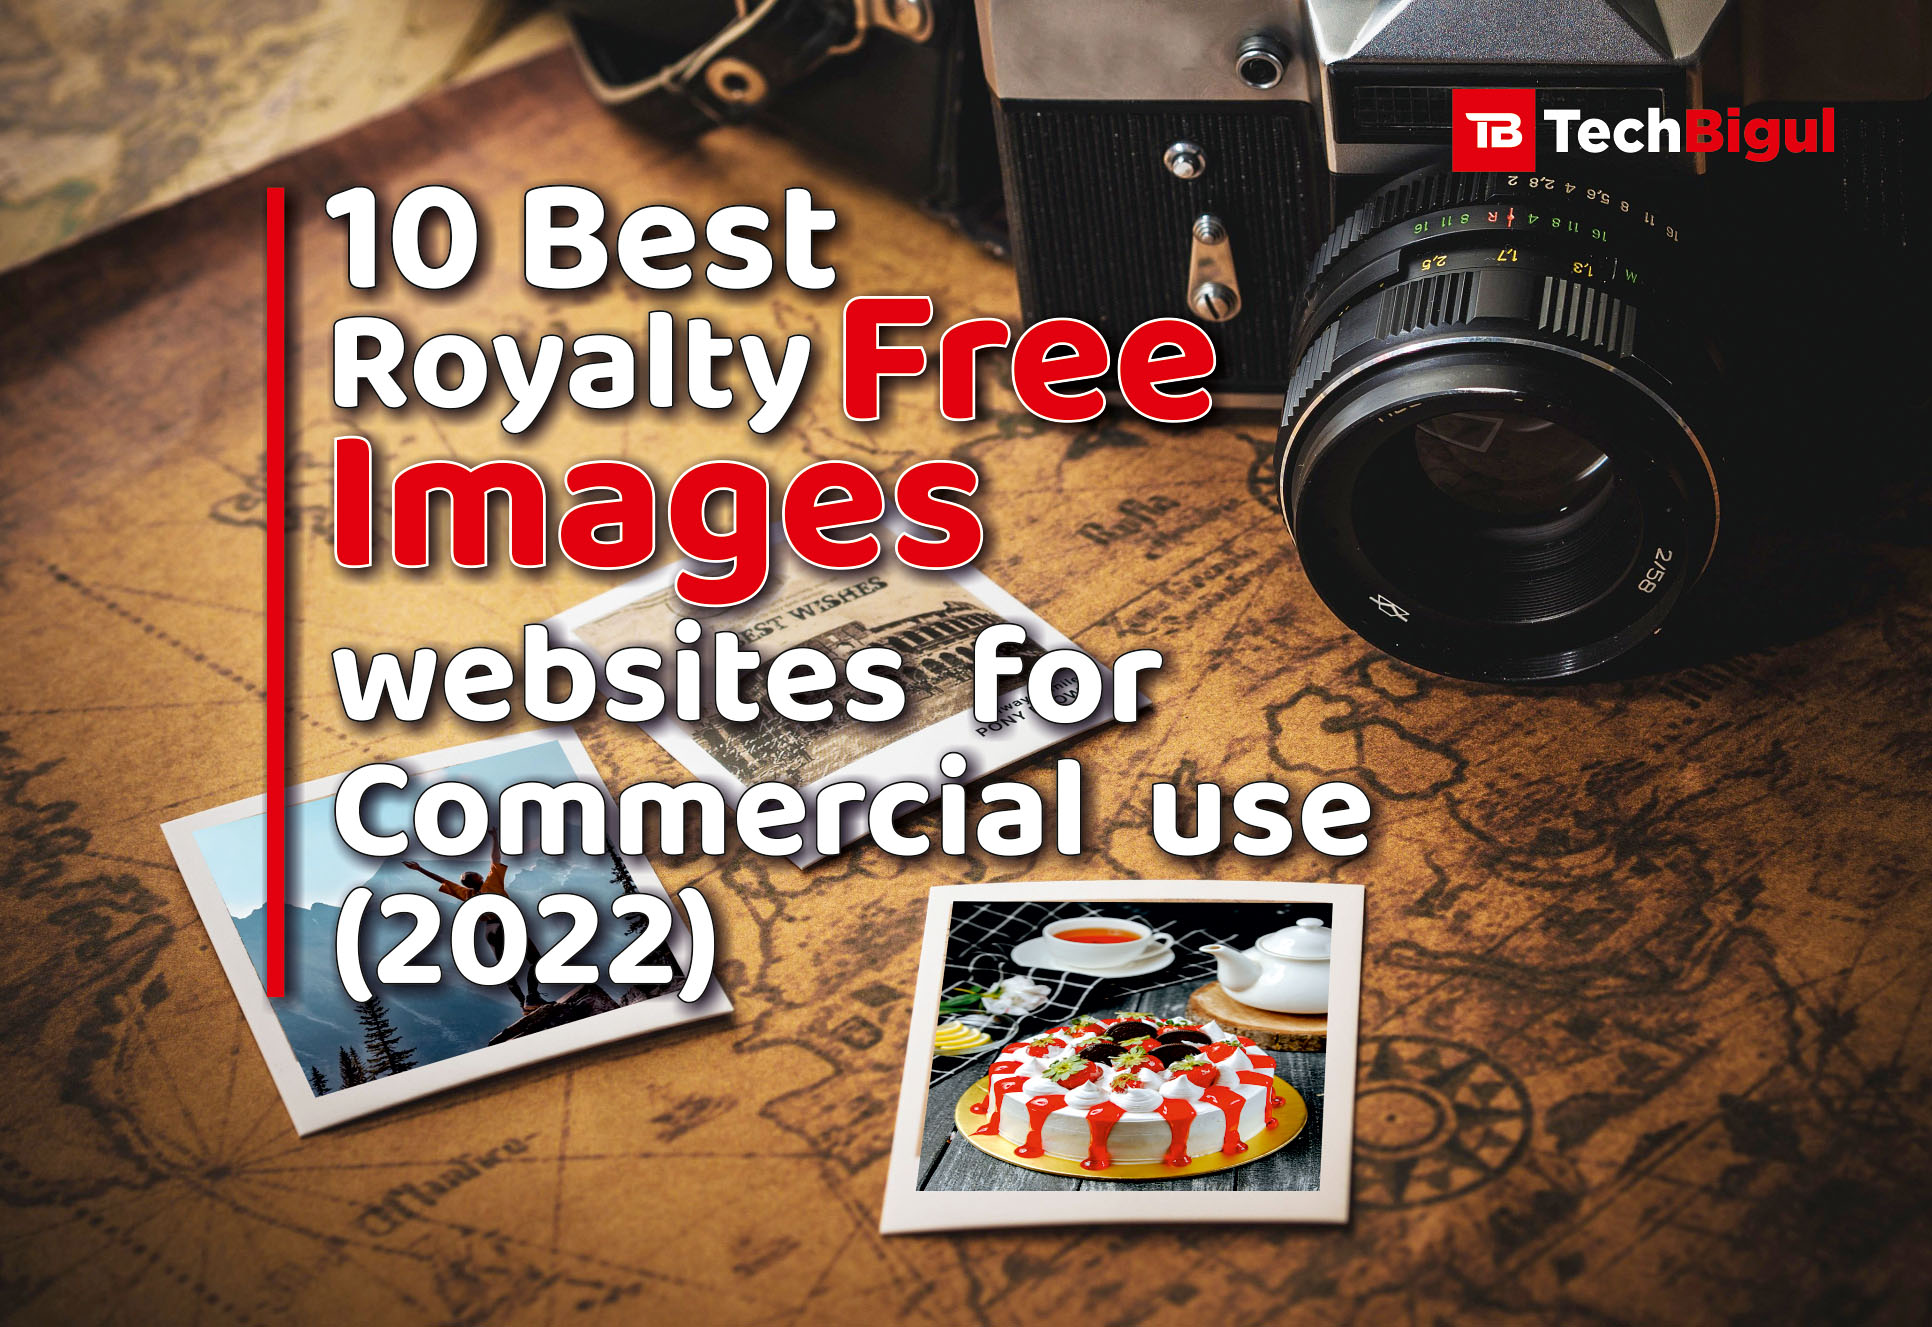 Royalty free images websites for commercial us 2022-techbigul